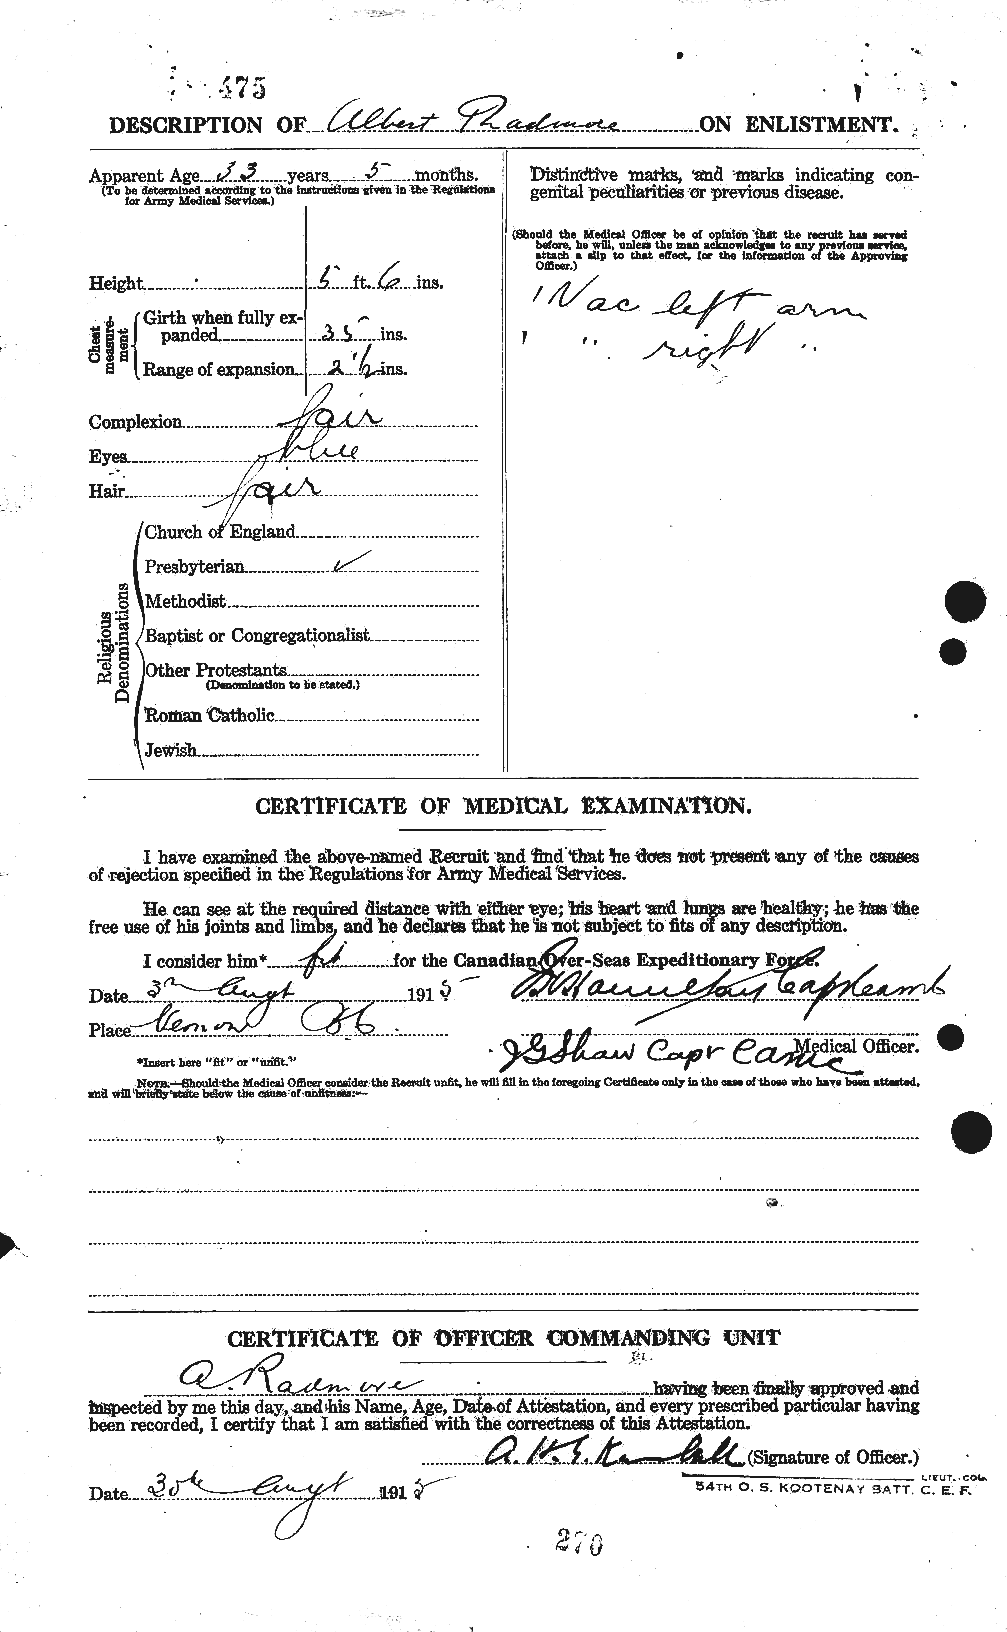 Personnel Records of the First World War - CEF 591131b